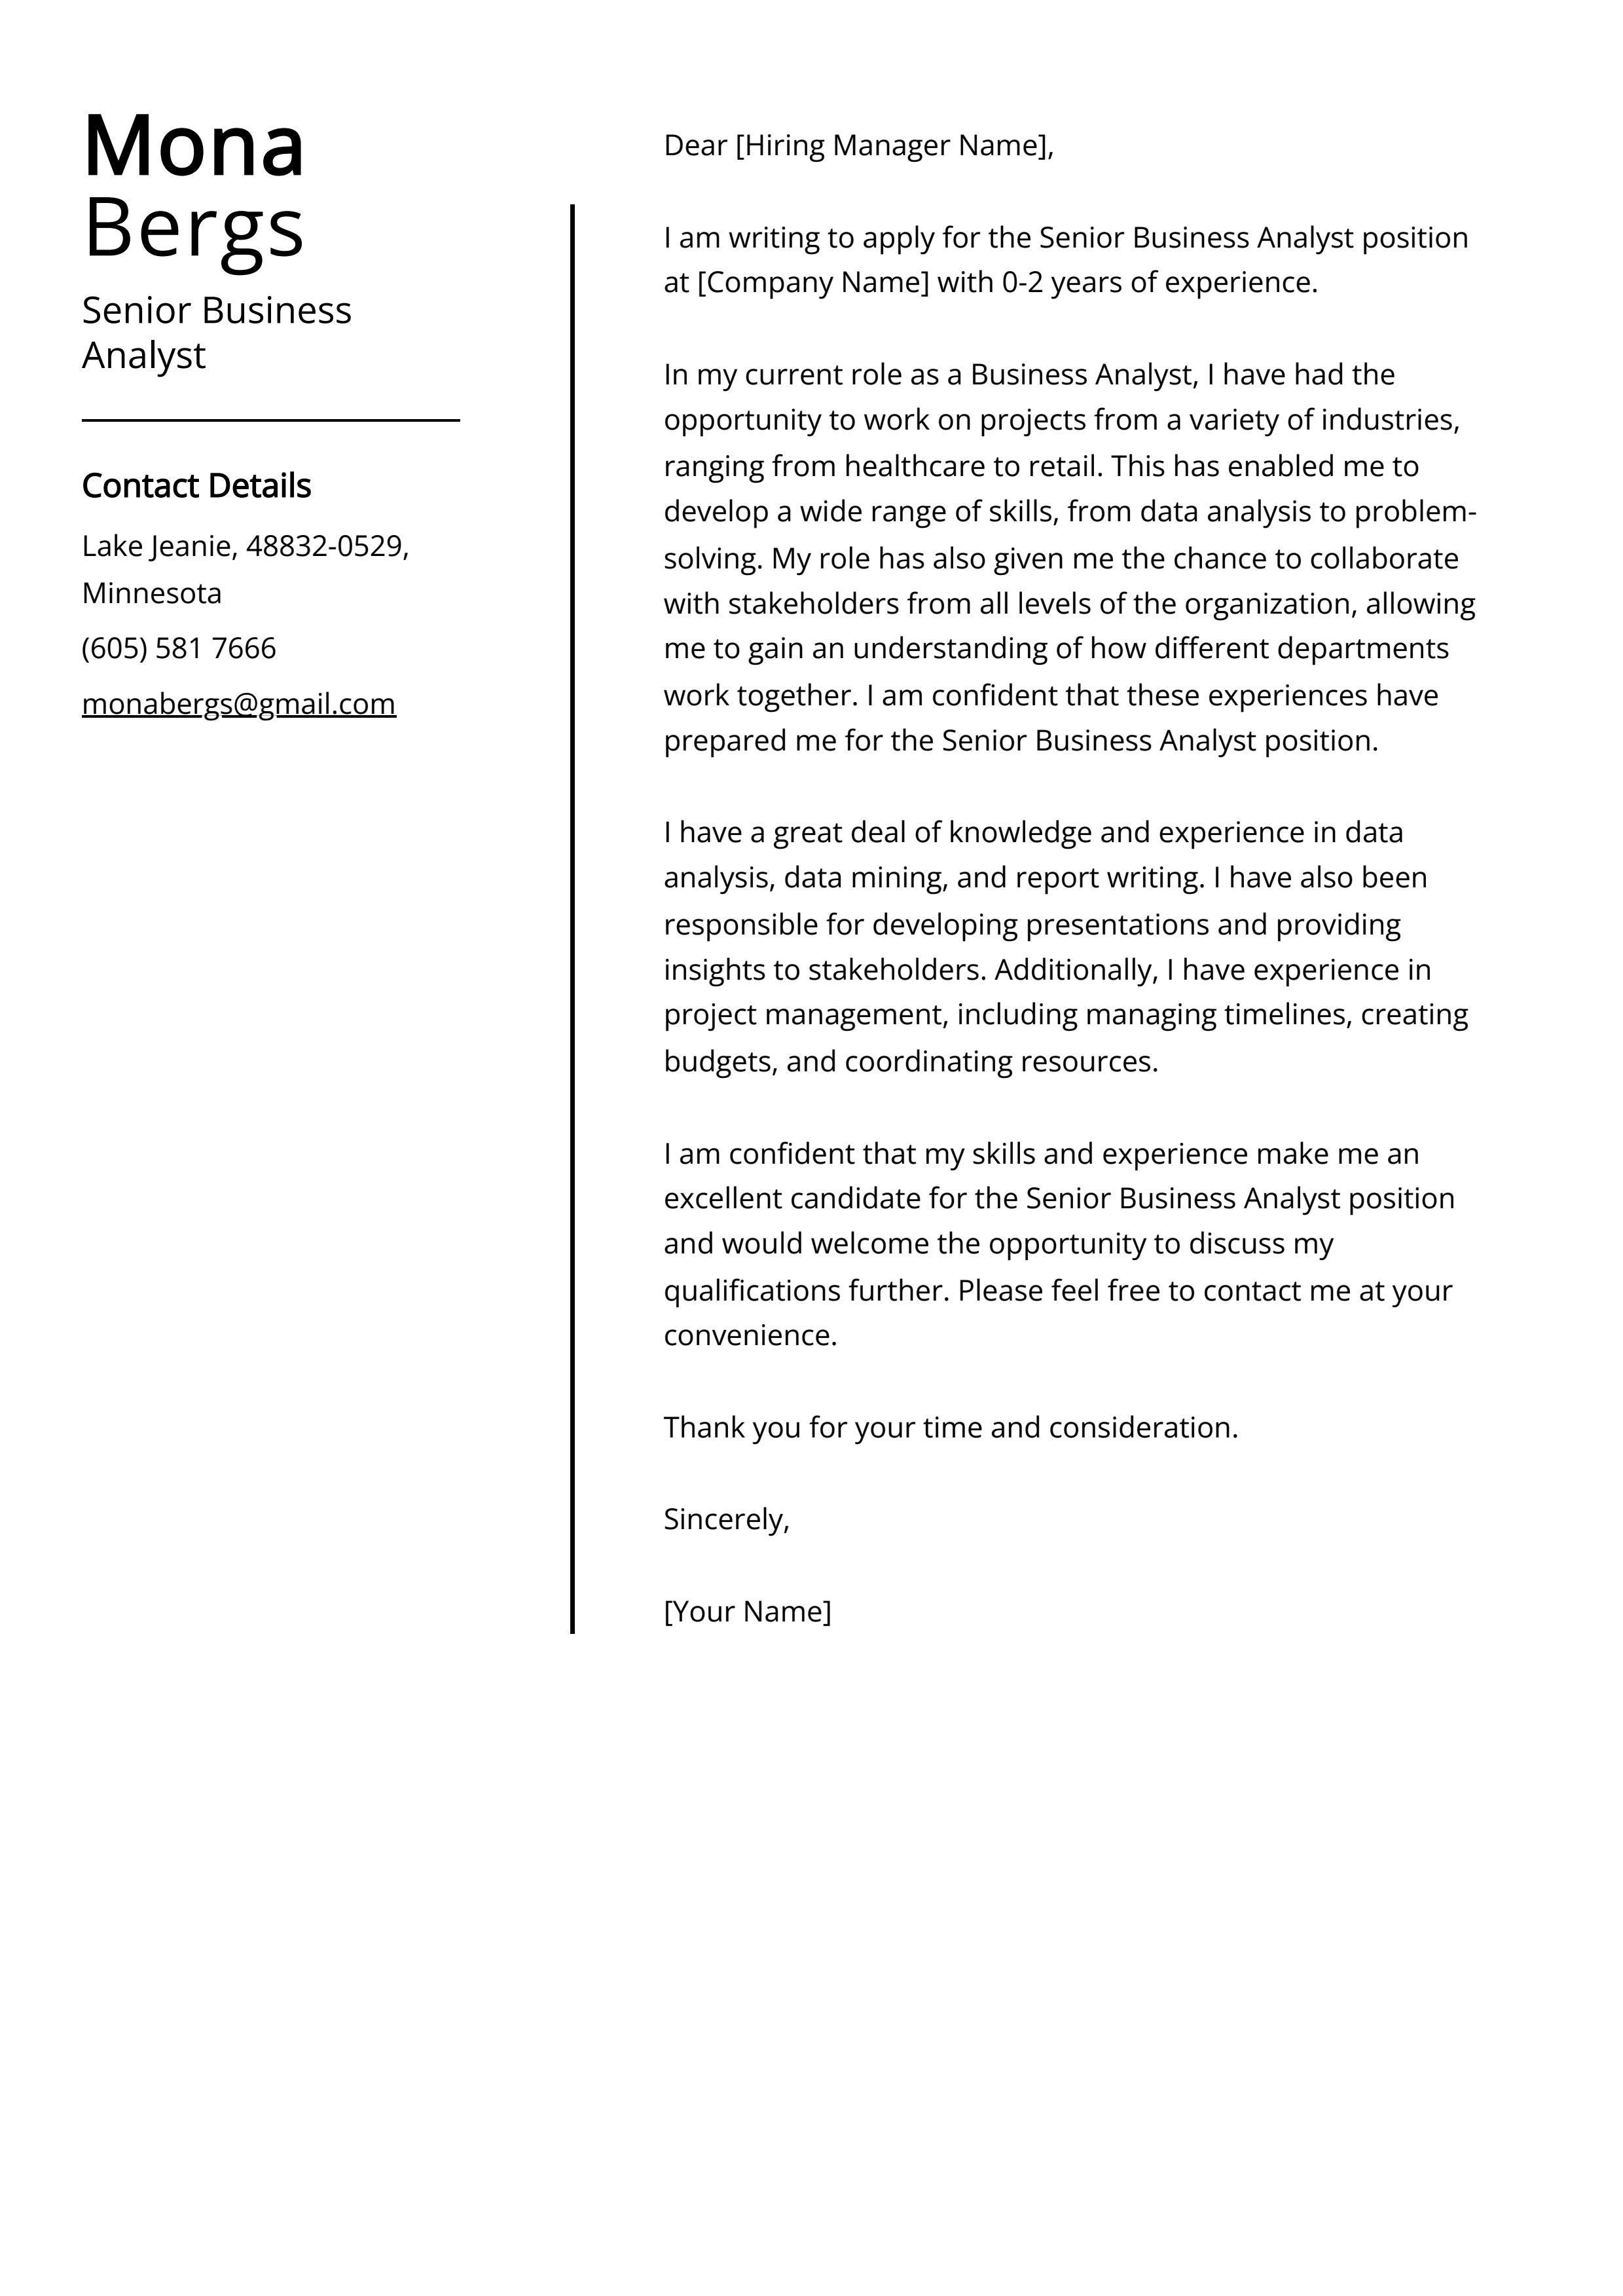 Senior Business Analyst Cover Letter Example